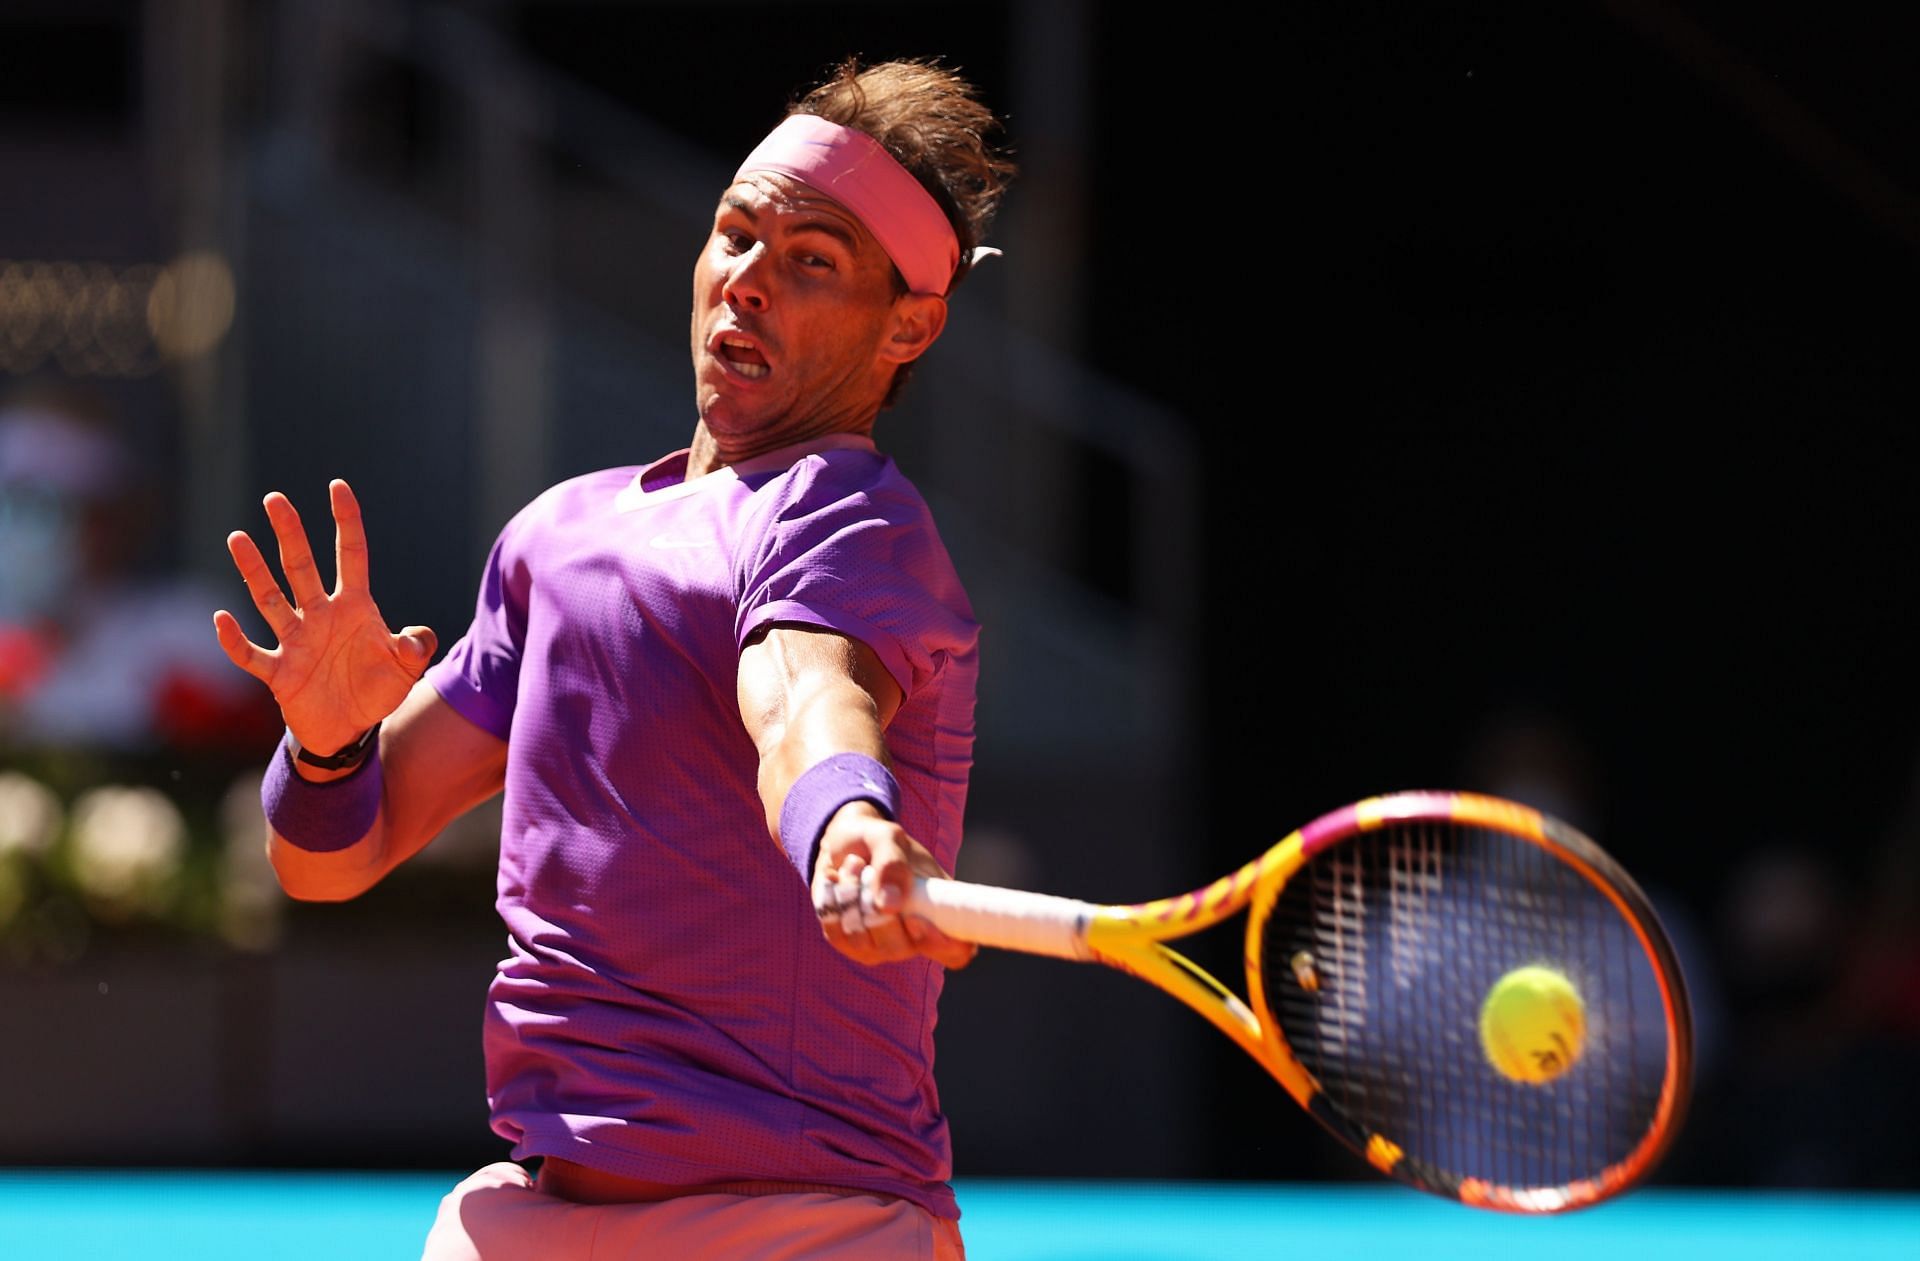 Nadal in action at the 2021 Mutua Madrid Open